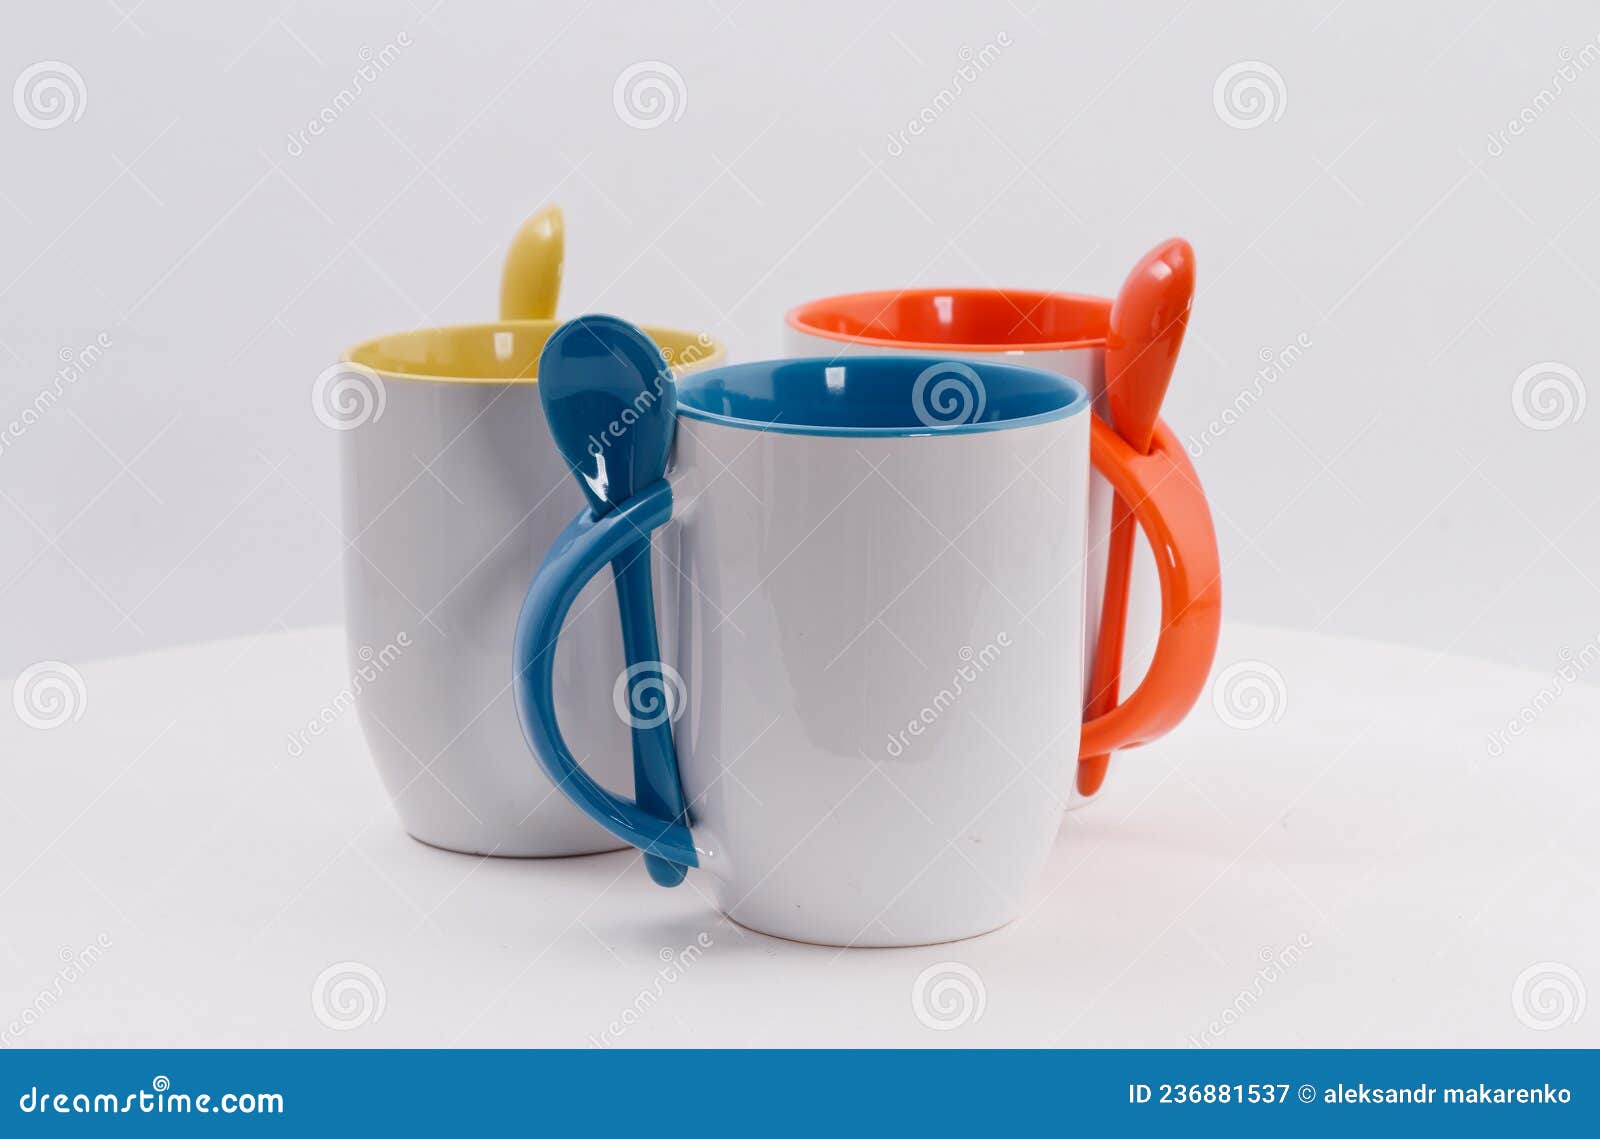 https://thumbs.dreamstime.com/z/colored-cups-sublimation-printing-isolated-white-background-colored-cups-sublimation-printing-isolated-white-236881537.jpg